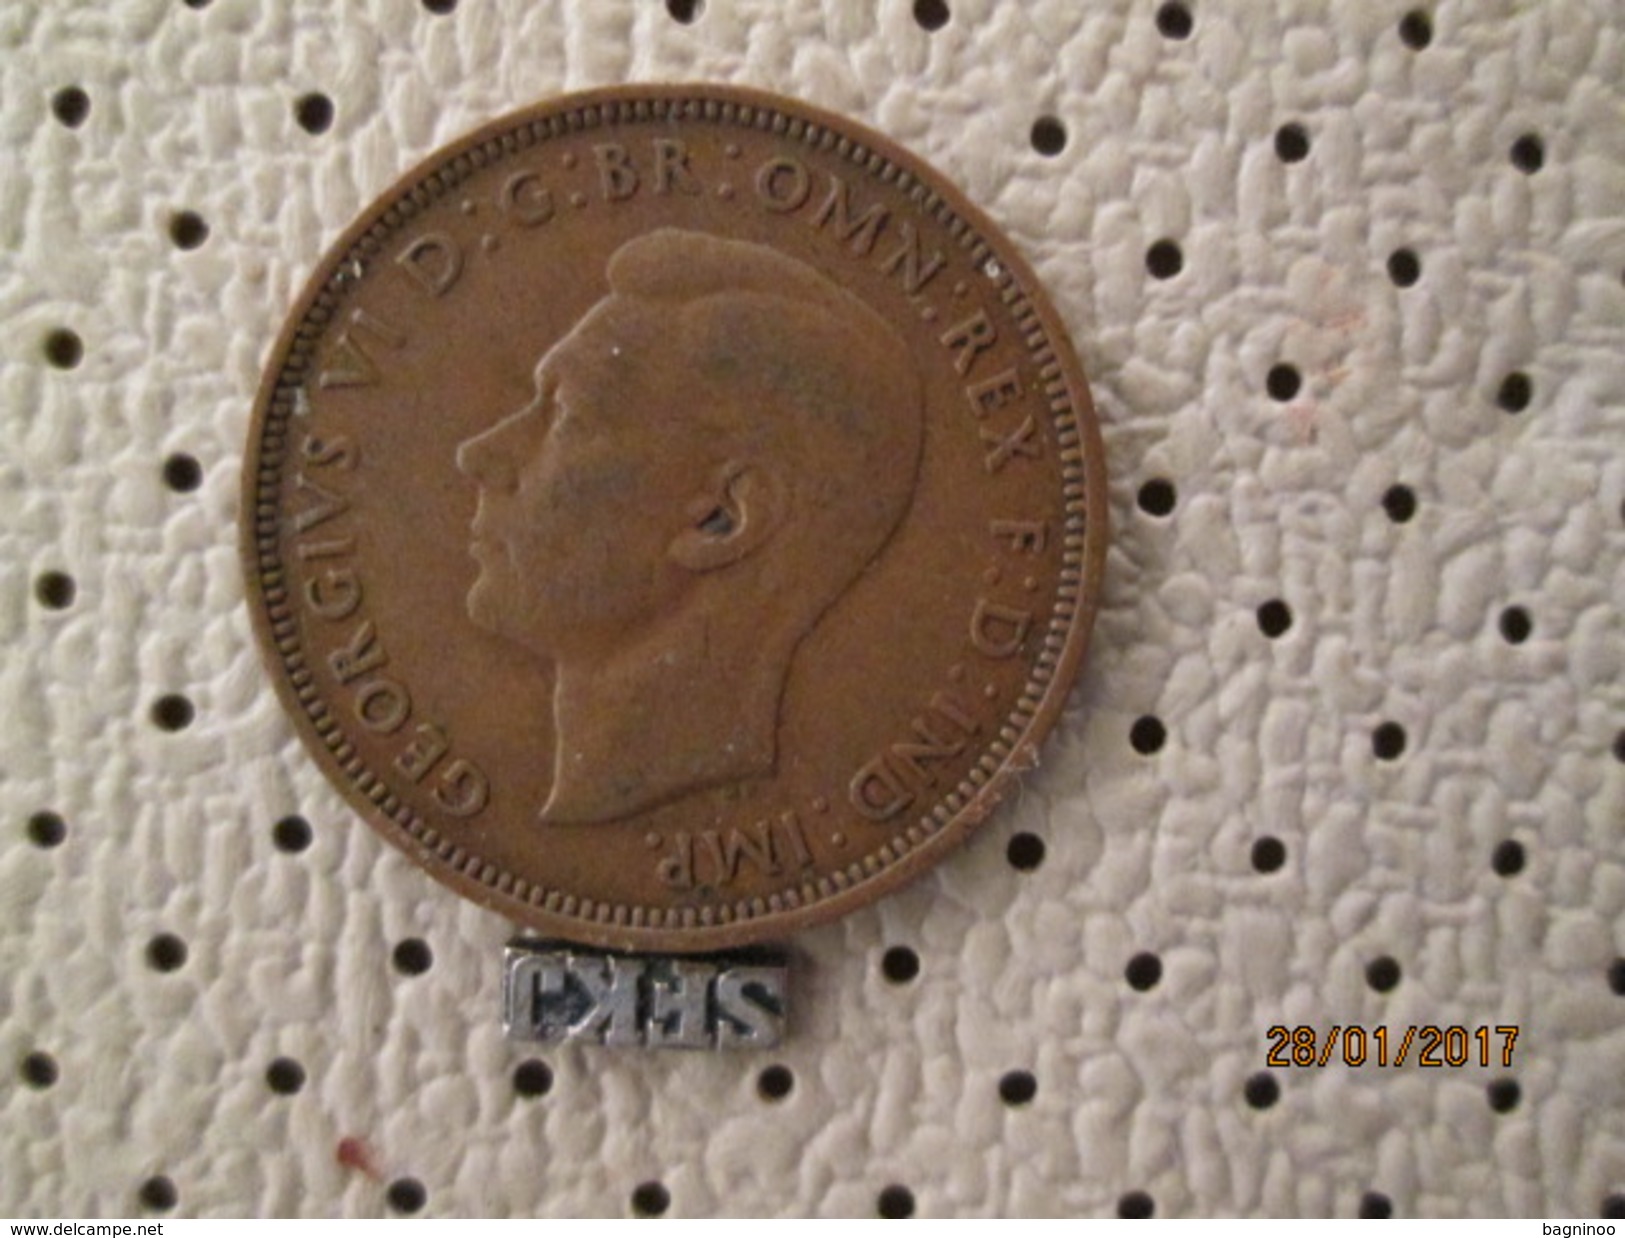 GREAT BRITAIN 1/2 Penny 1942 # 4 - C. 1/2 Penny